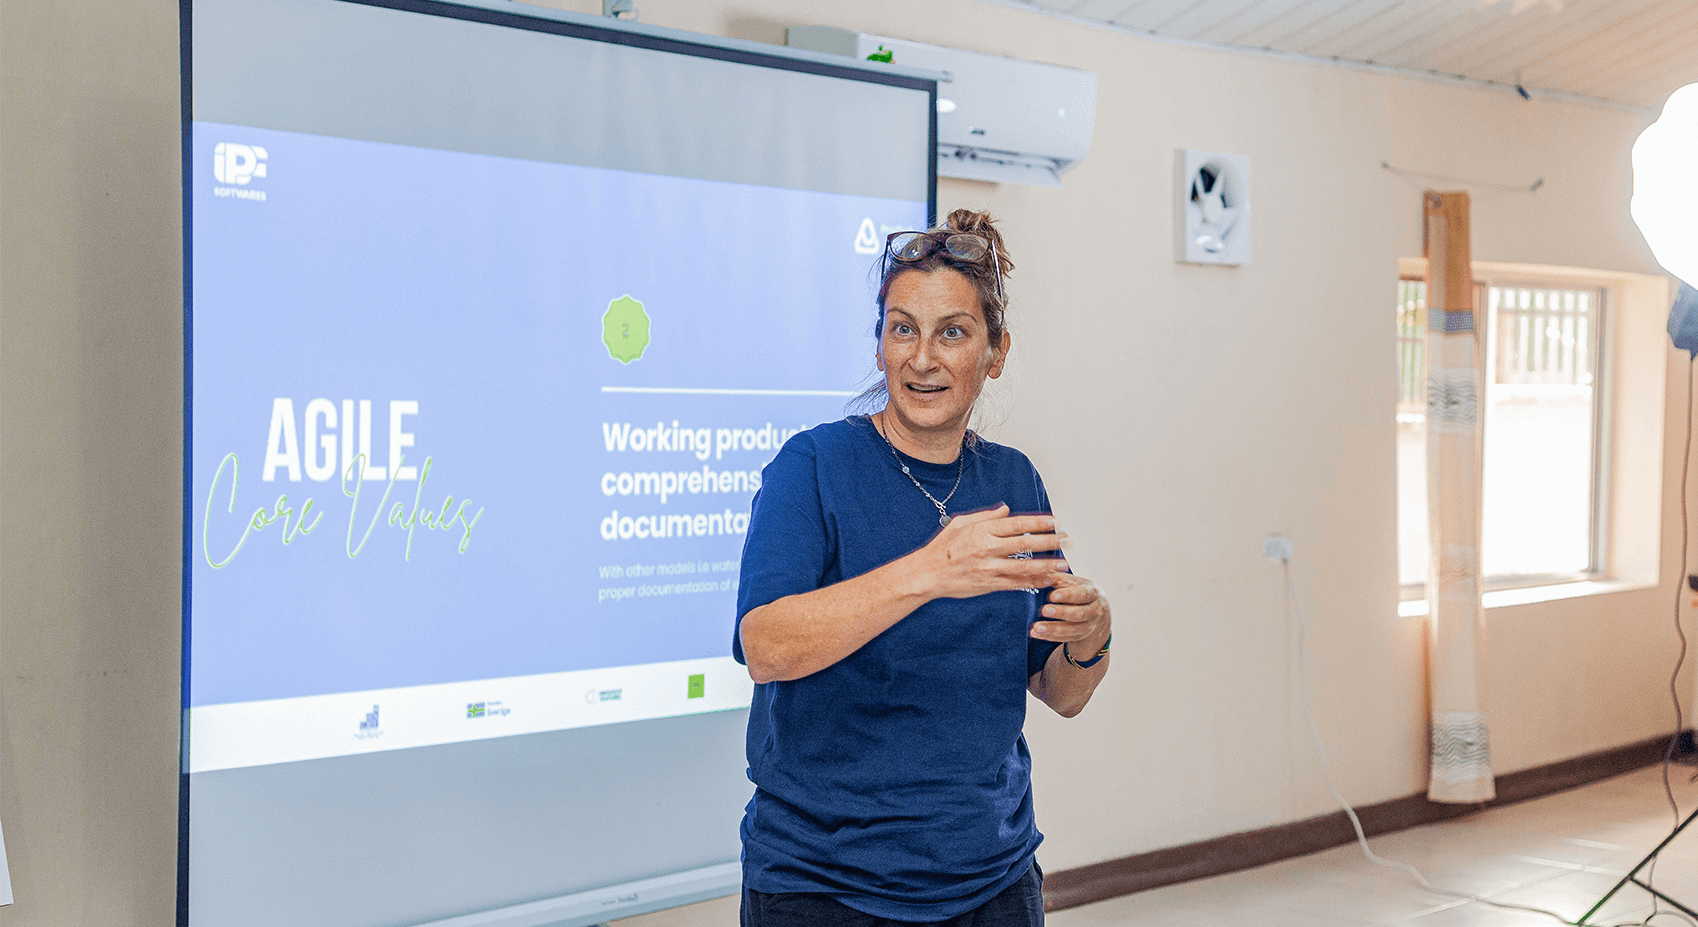 (Ivana Damjanov | Country Lead, Tanzania, Inclusive Digital Economies at UNCDF Photo Captured During the Pesa Tech Accelerator Agile Training  to Startups by iPF Softwares)